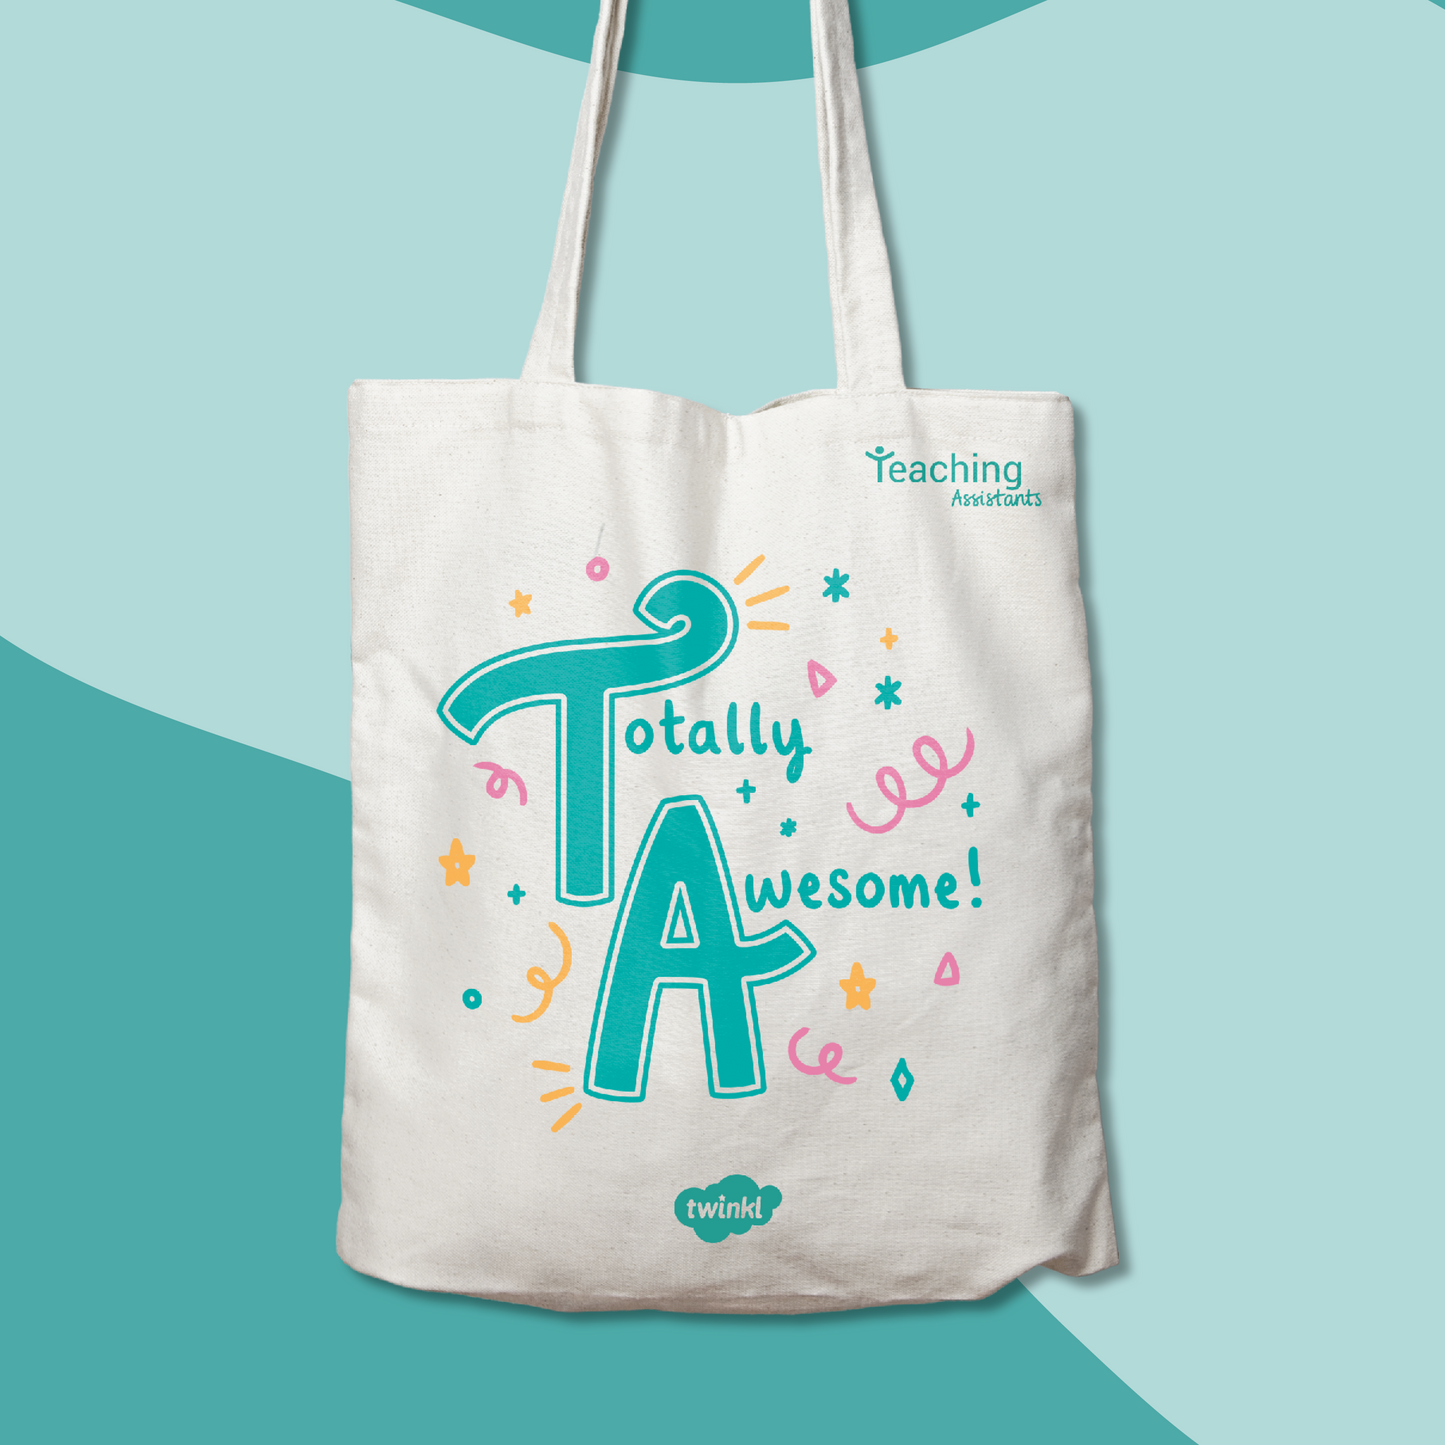 Teaching Assistant Totally Awesome Tote Bag